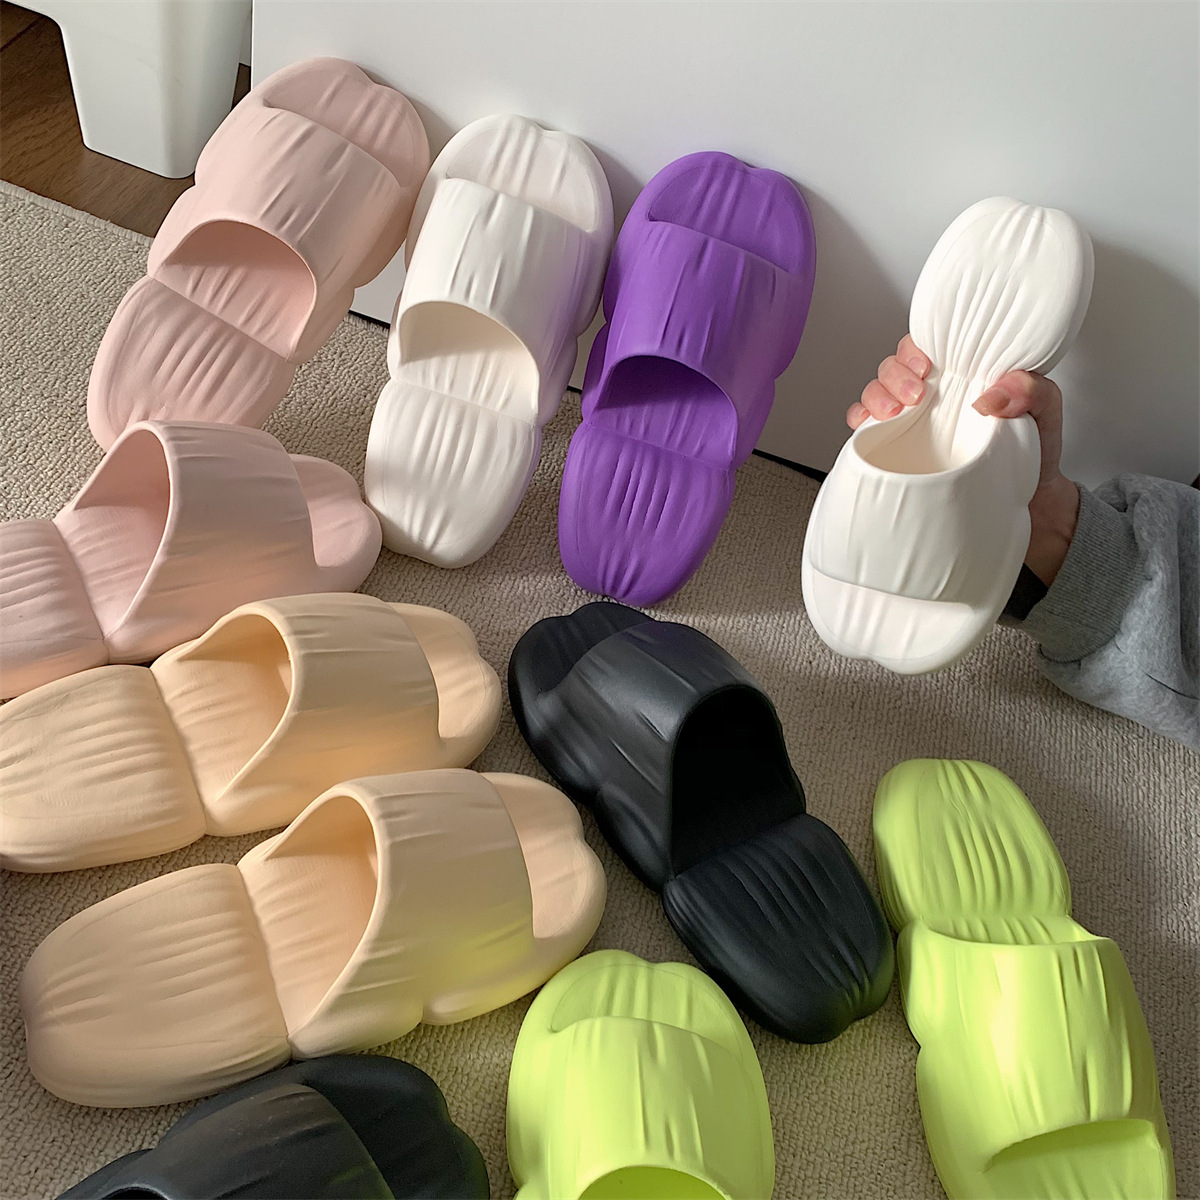 Household Shoes6